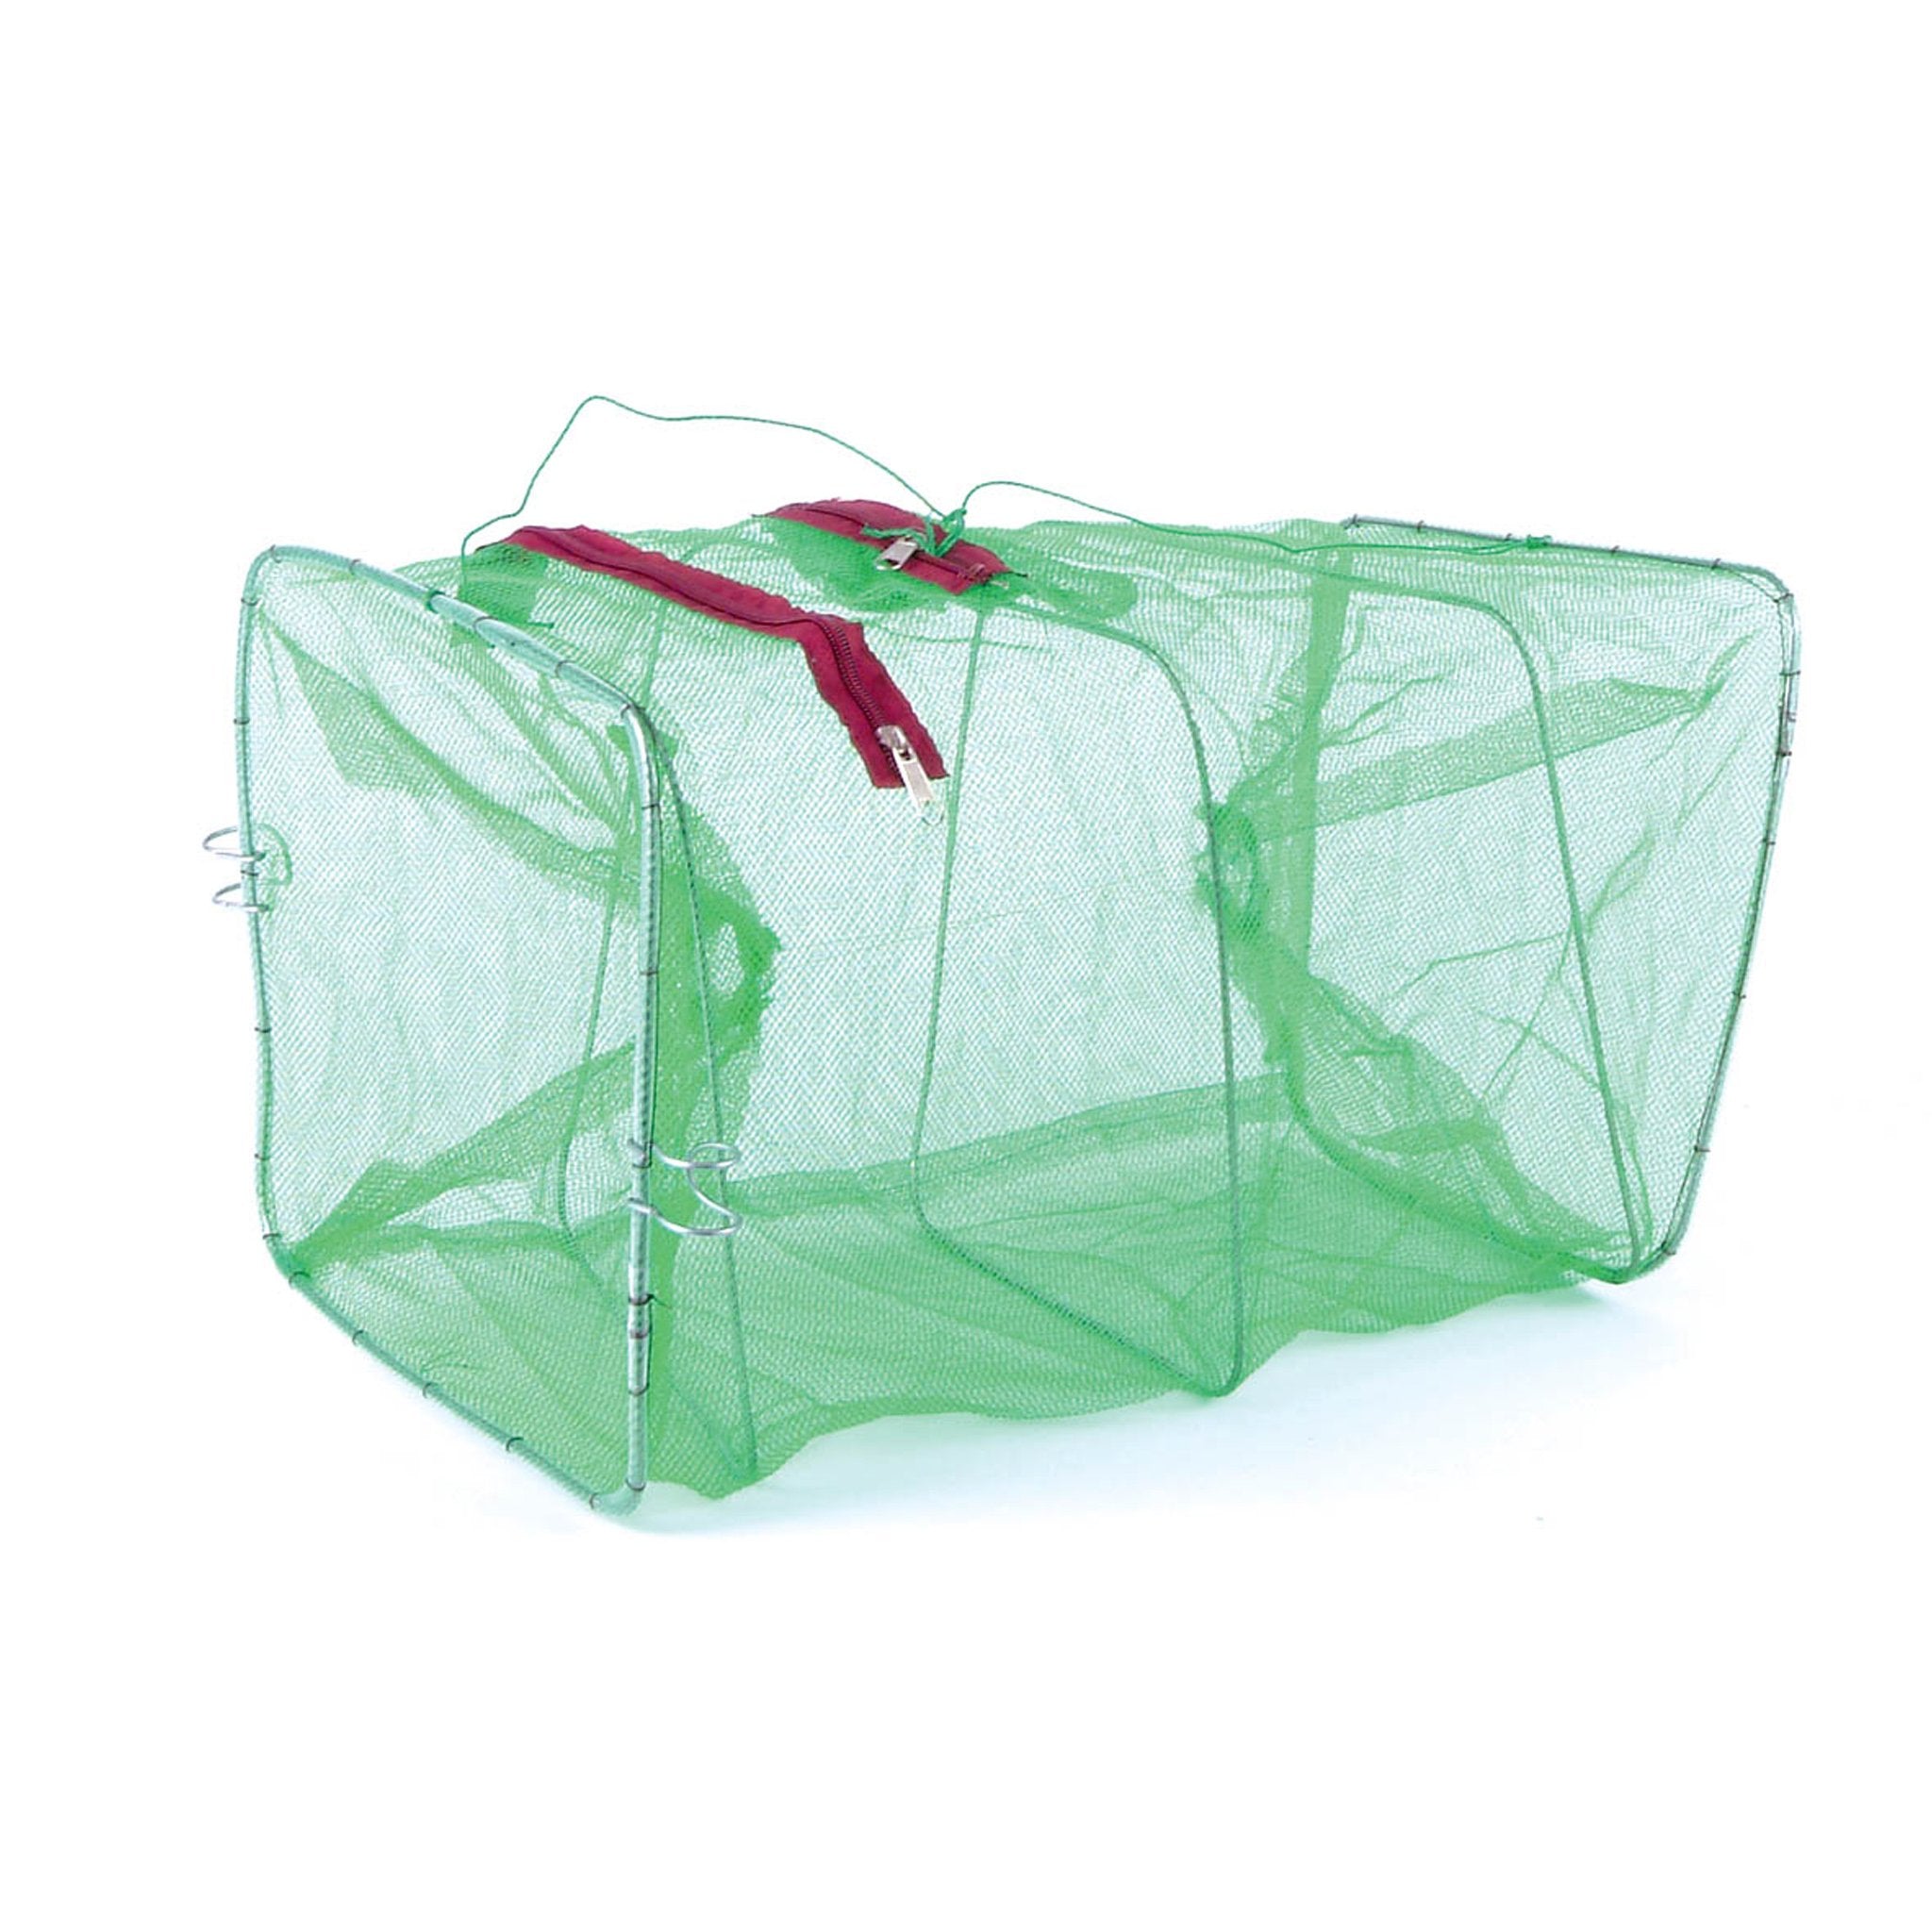 Net Factory Collapsible Bait Trap Green - 1 1/2 rings - Jarvis